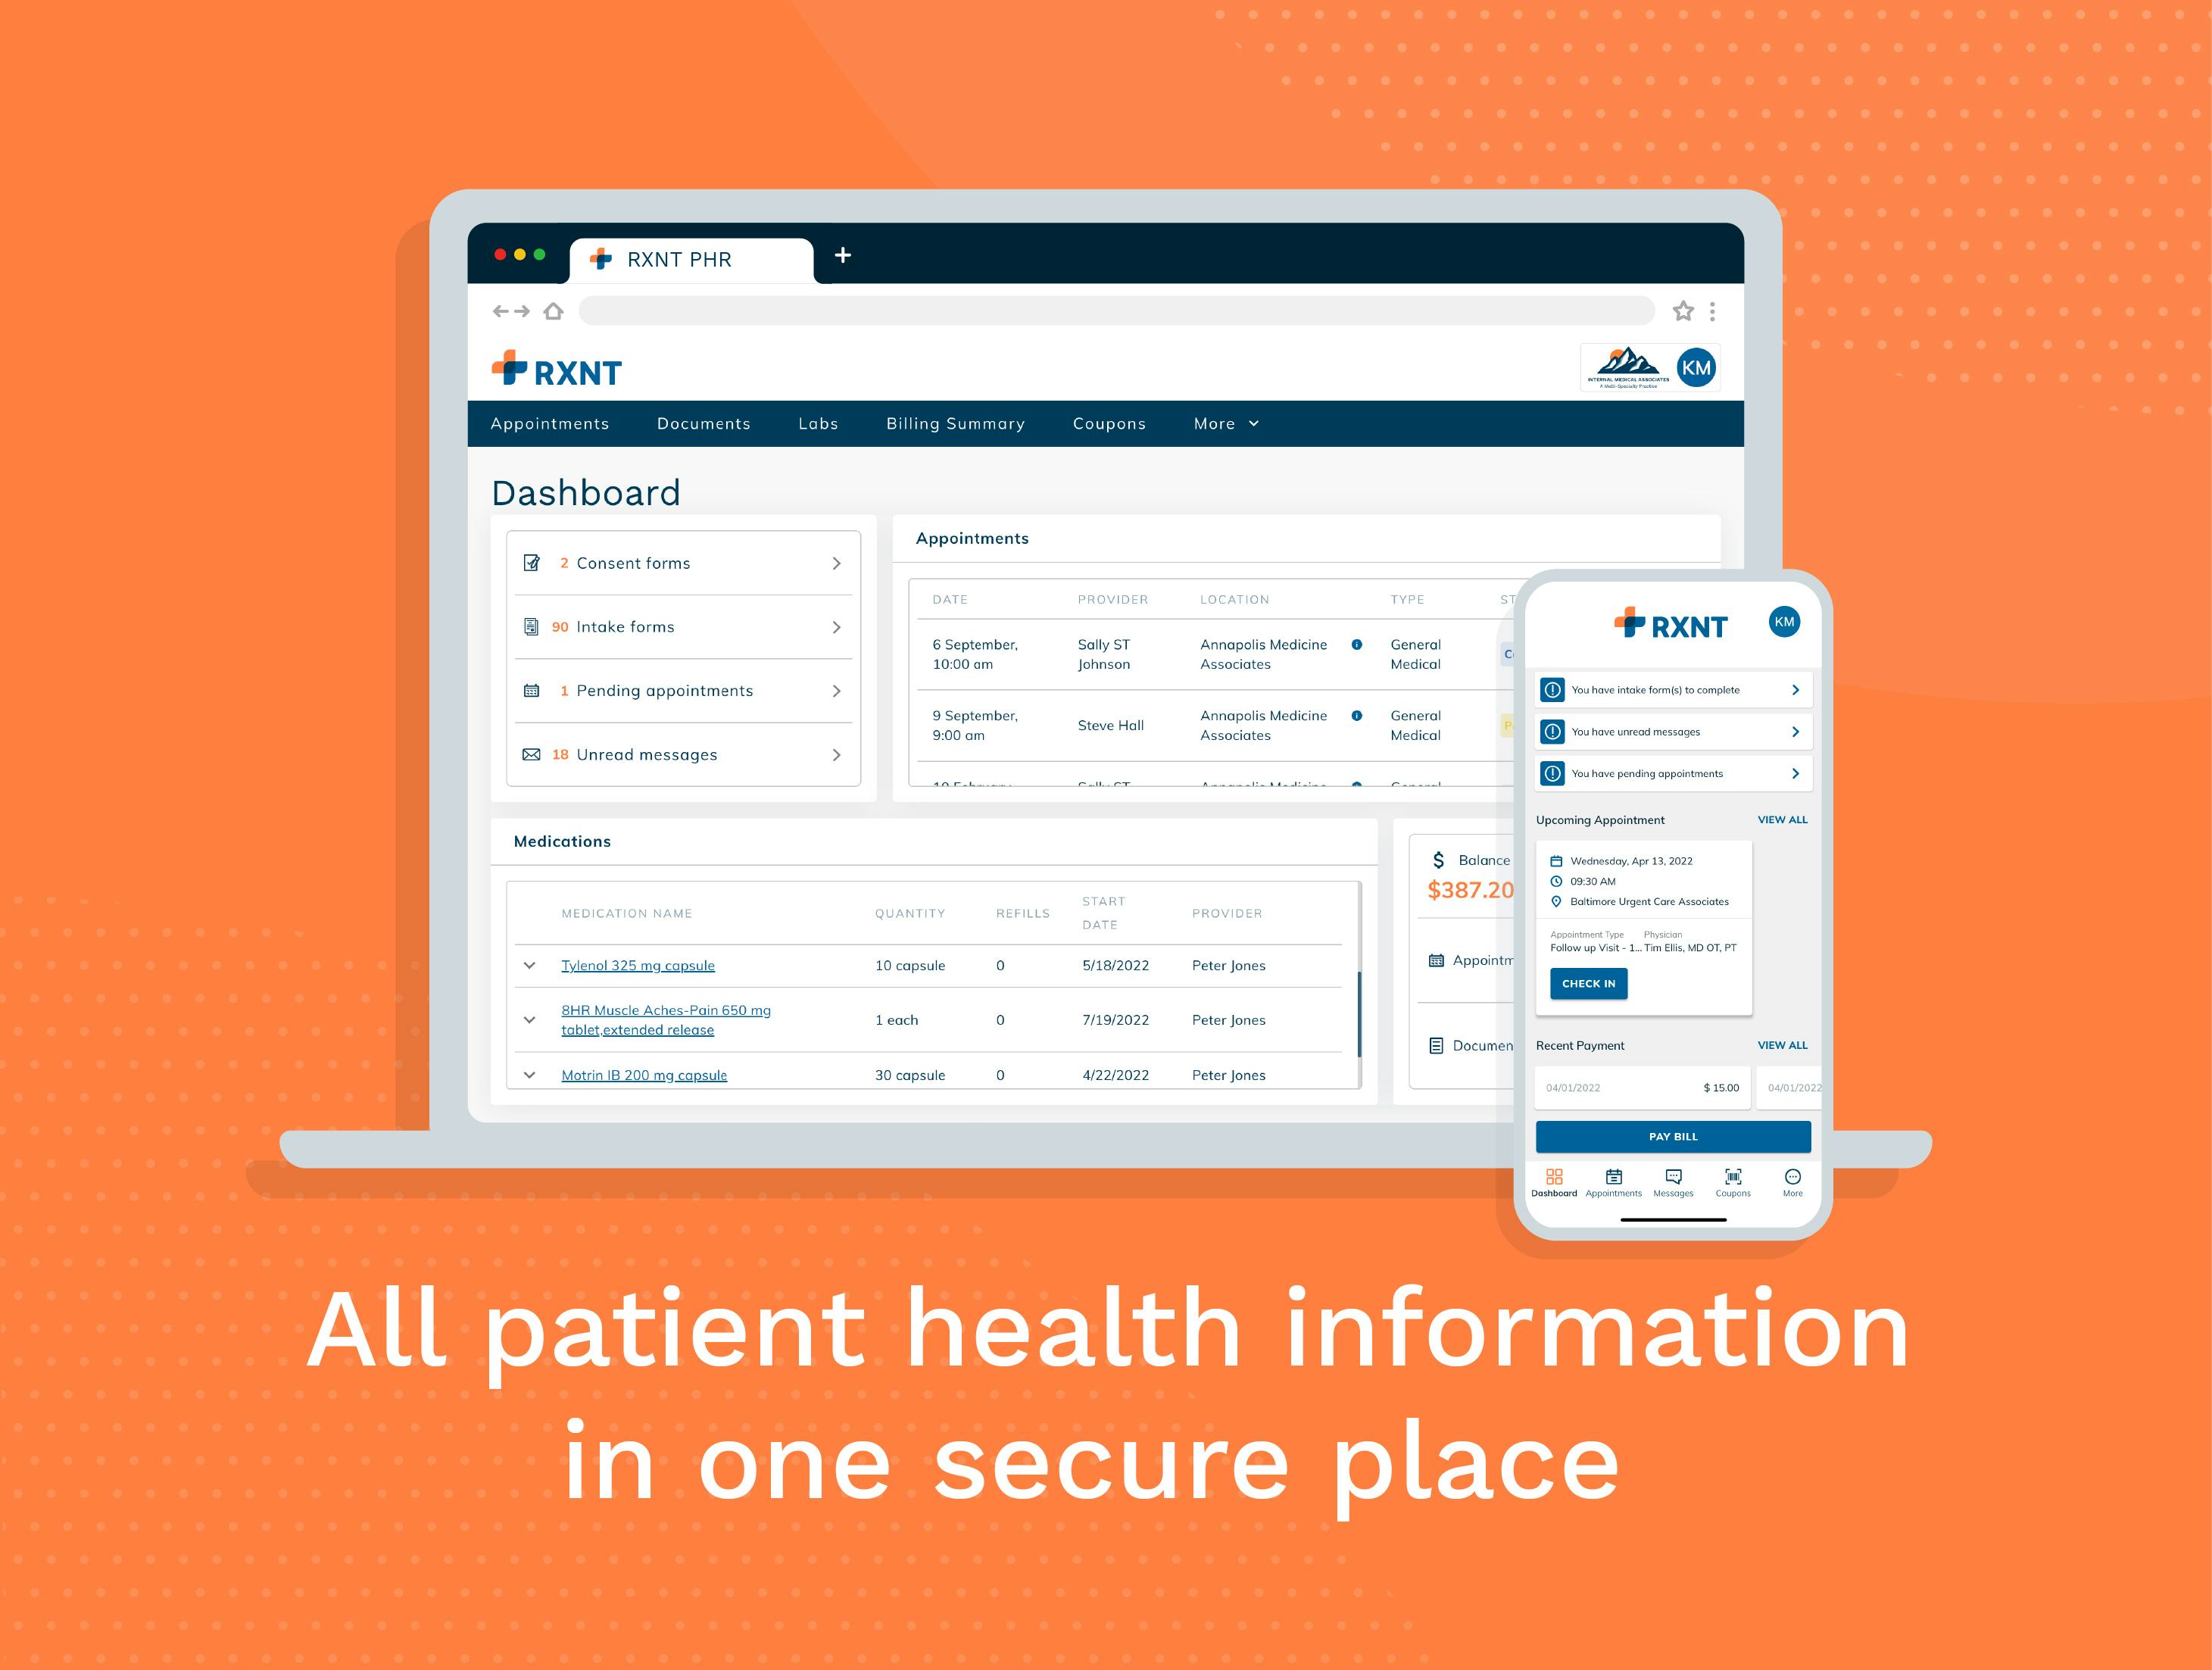 RXNT Software - RXNT Patient Engagement Software. Enable patients to schedule appointments, send messages, review lab results, sign documents & forms, and pay bills online. All patient health information in one secure place. Available for desktop, tablet, and mobile.